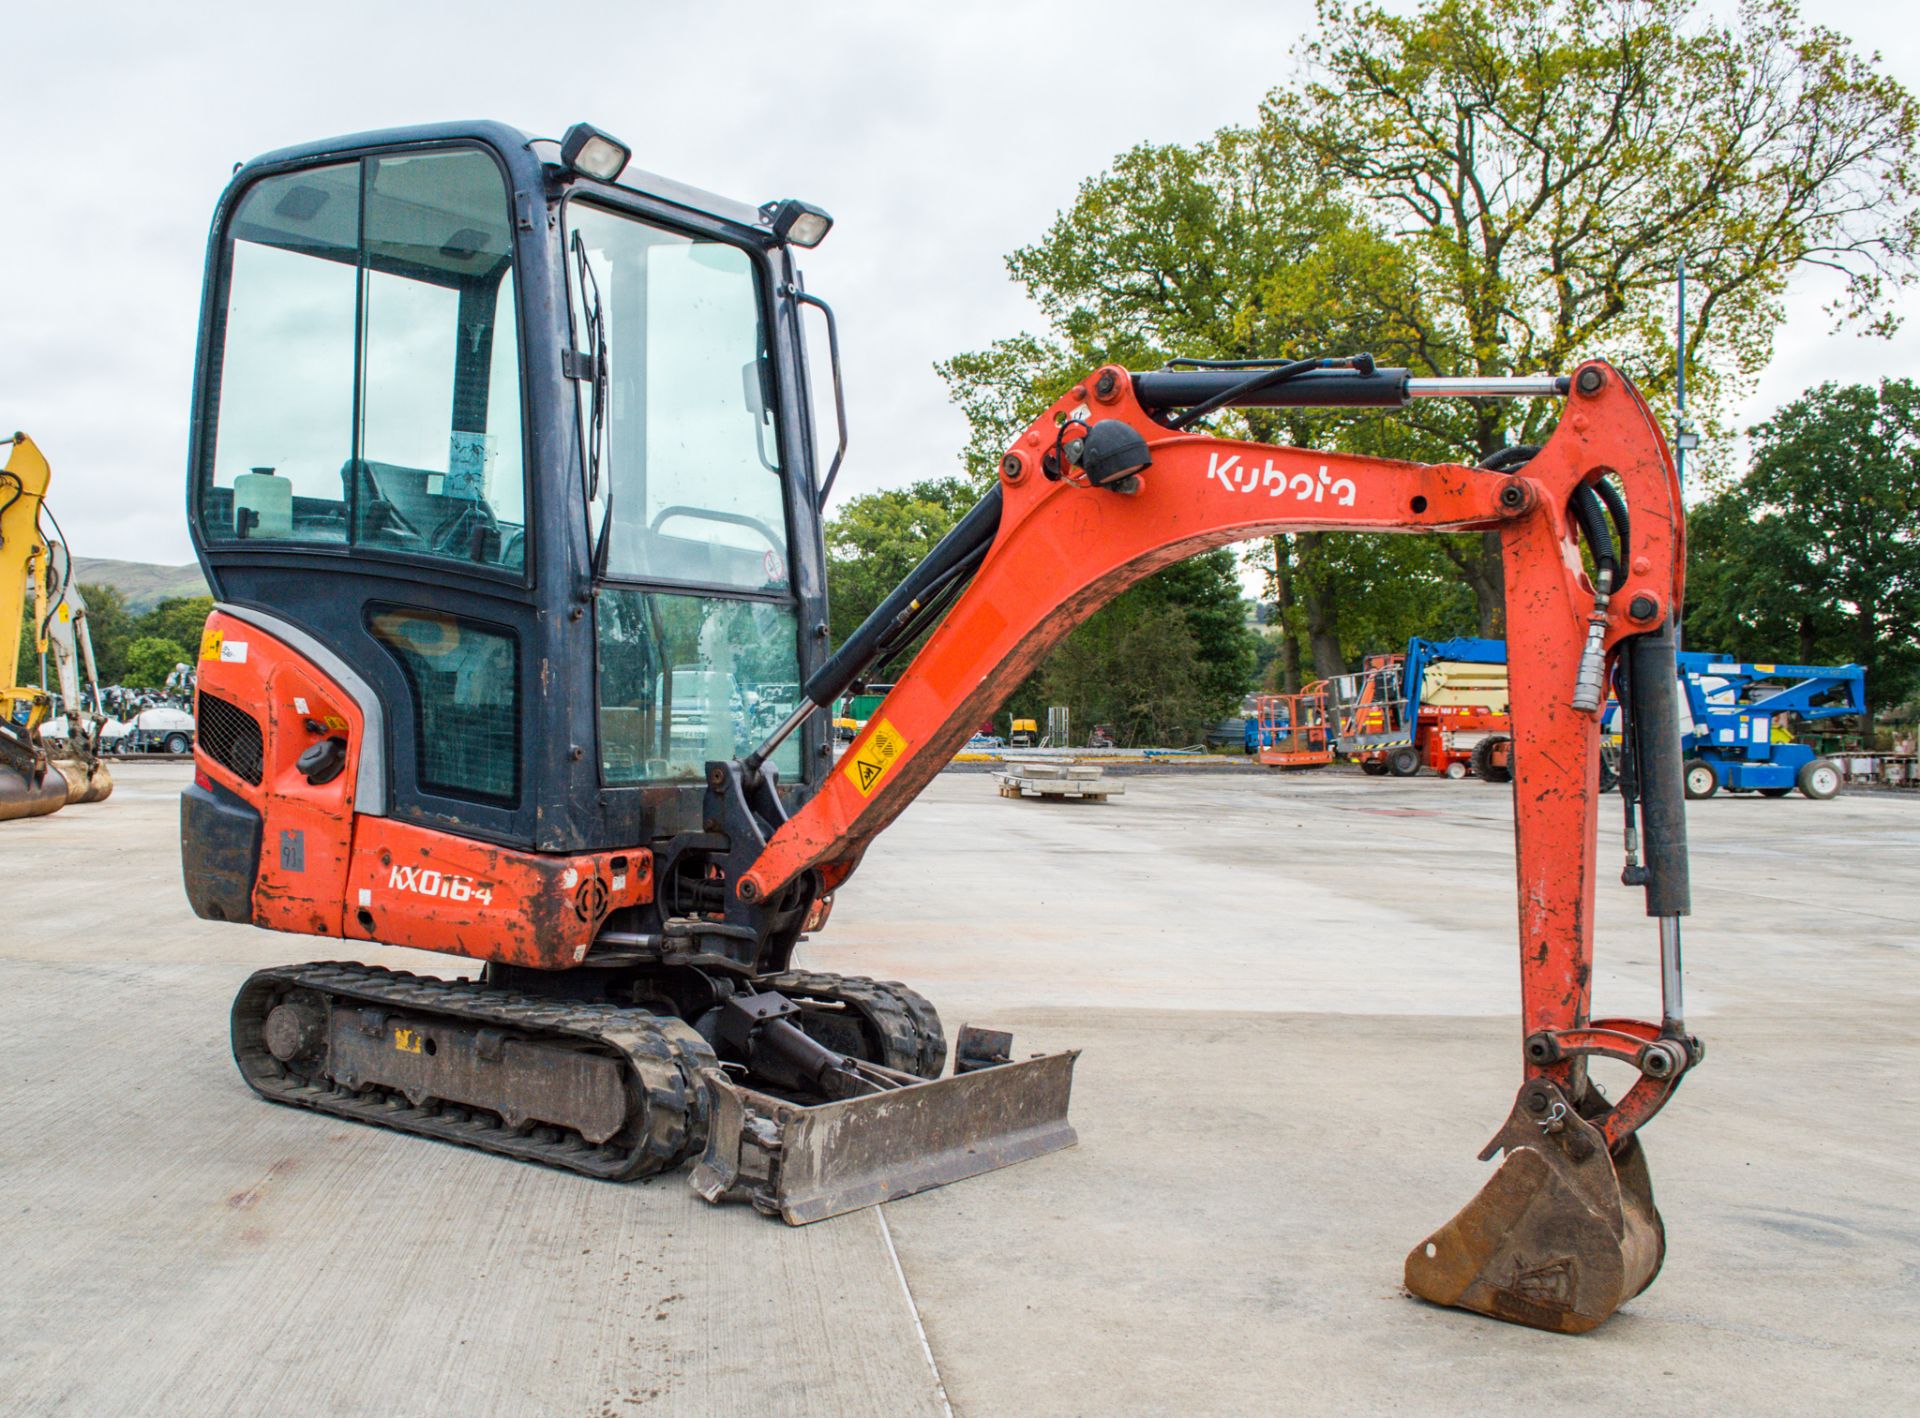 Kubota KX016-4 1.6 tonne rubber tracked excavator Year: 2013 S/N: 56652 Recorded Hours: 3393 c/w - Image 2 of 16